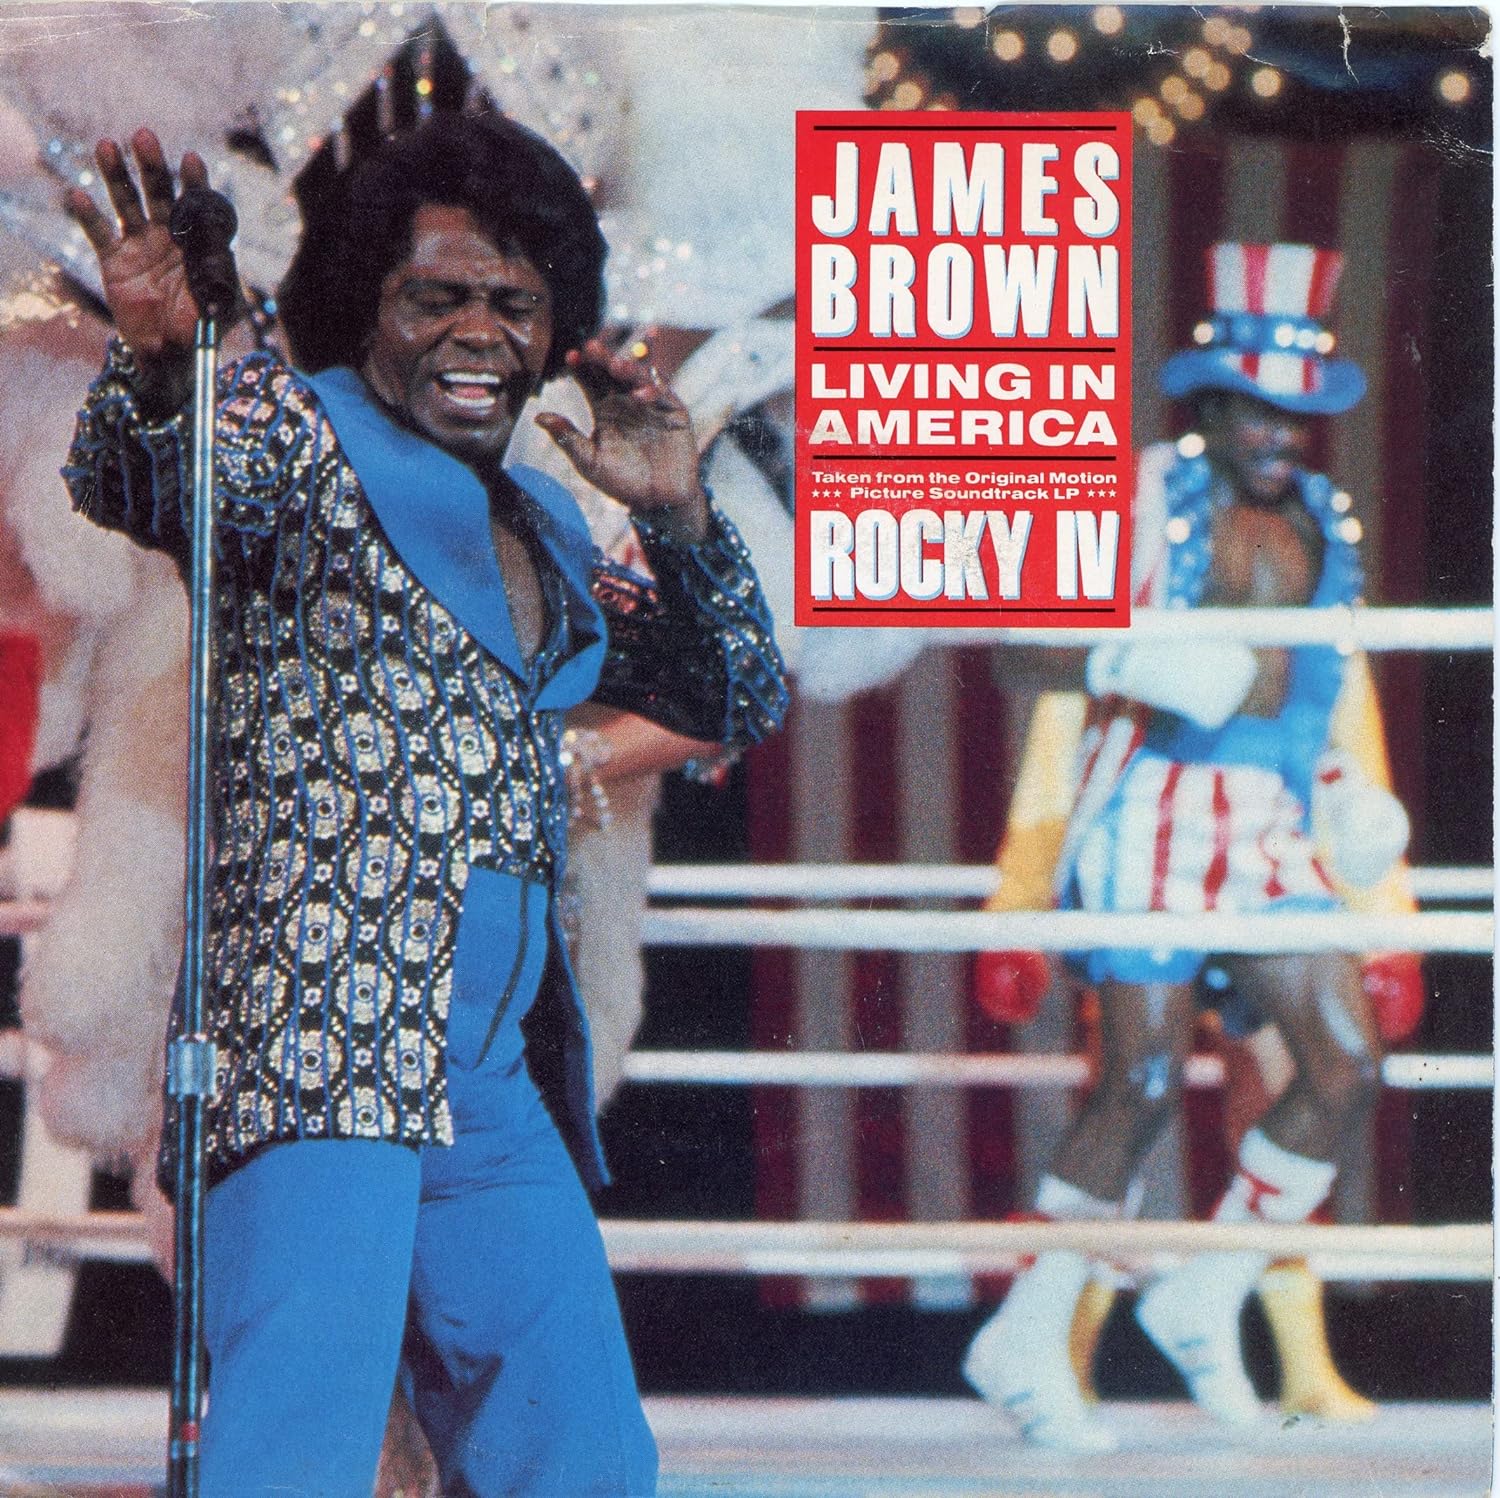 Living in America: James Brown’s Cultural Legacy and Iconic Style